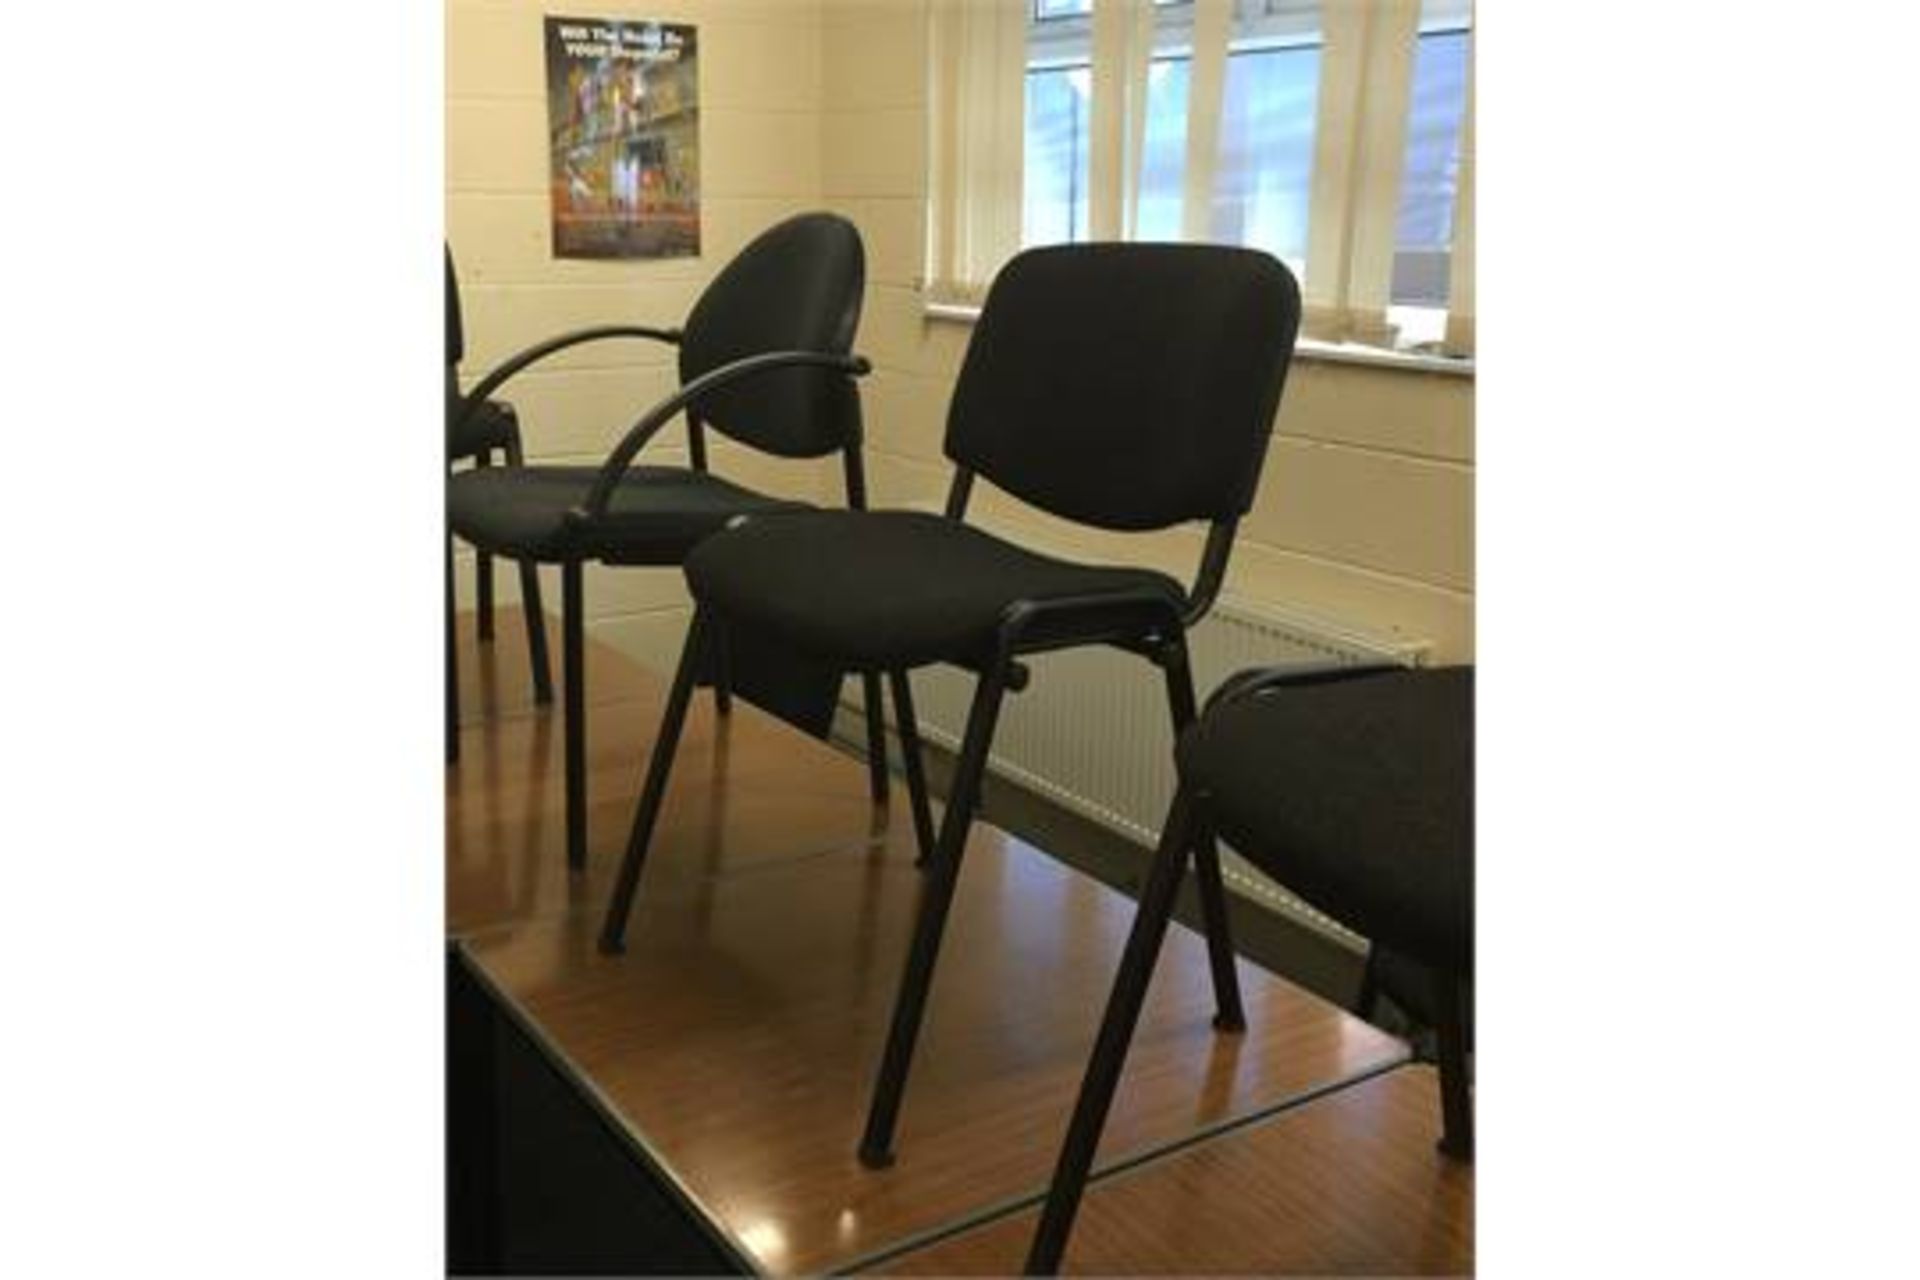 1 x Table & 1 x Black Upholstered Chair,